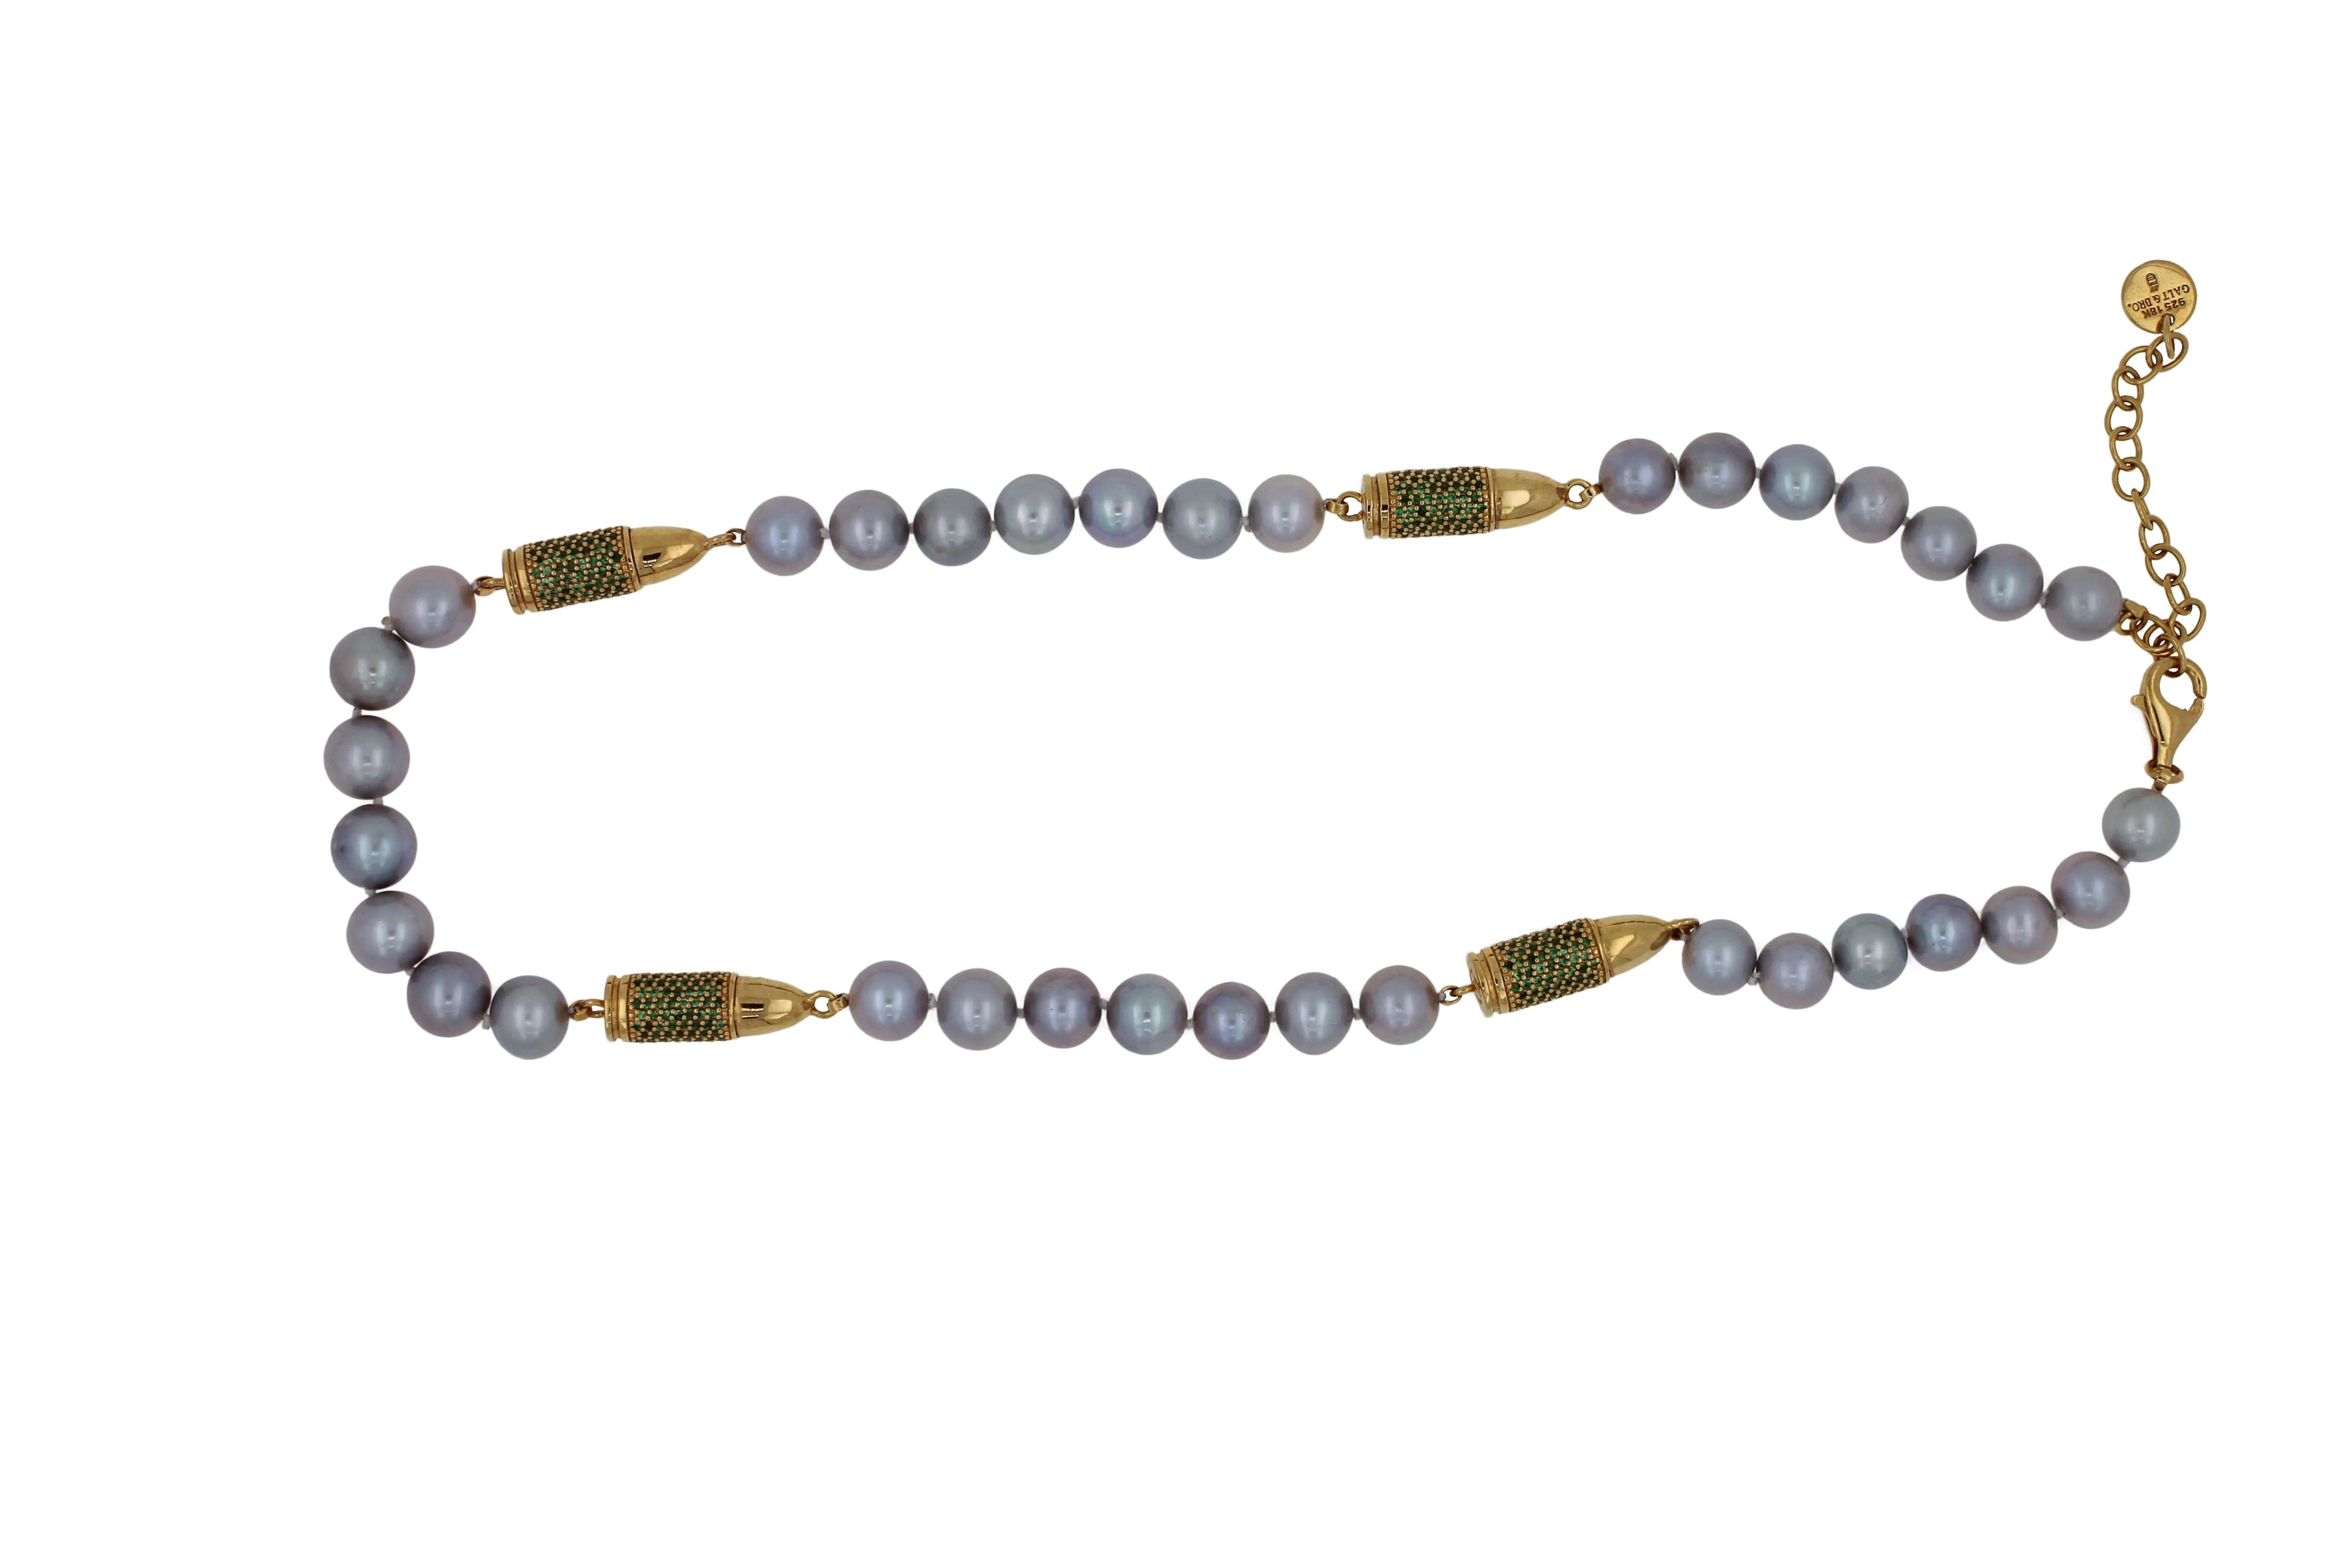 Green Tsavorite Pave Set Gold Bullet Rocket Silver Pearl Silver Vermeil Necklace
*Genuine Green Tsavorites Gemstones 5.00 CTW
* Natural Silver Pearls
* 18K Yellow Gold Vermeil
* 18 to 20 Inches Adjustable Clasp
* In-Stock & Ready to Ship